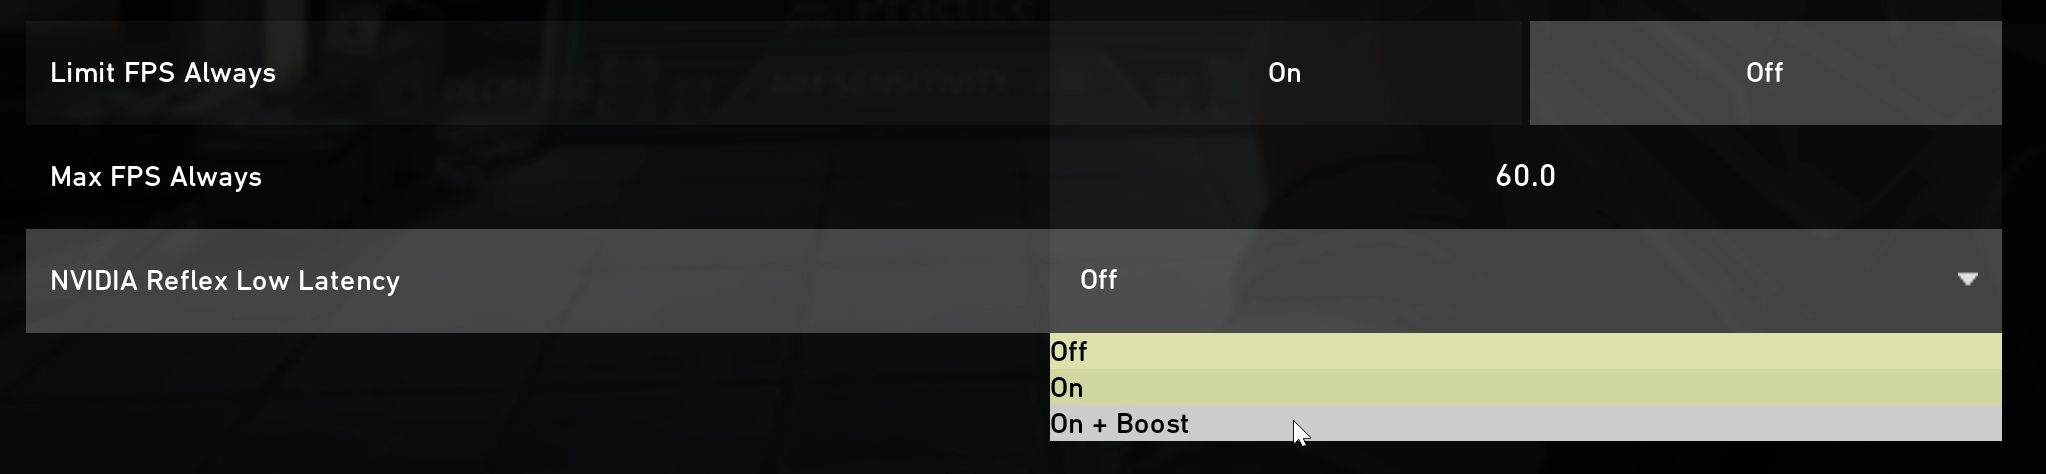 no option to turn on game mode